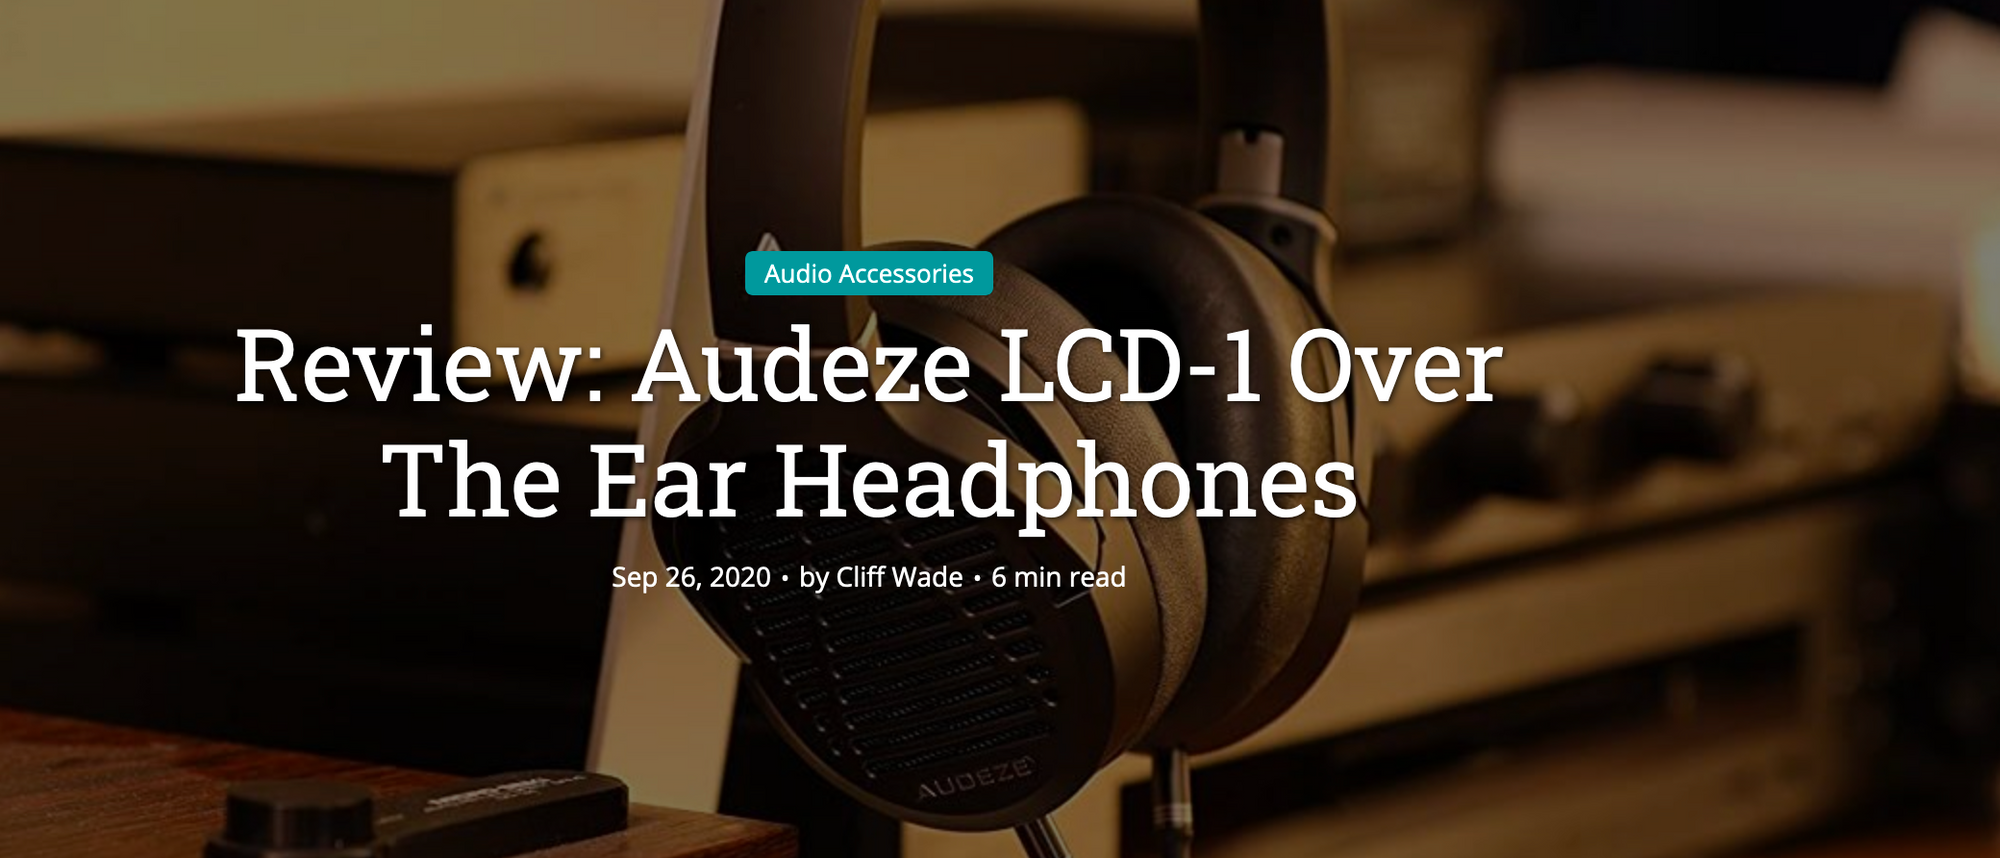 TechDissected Reviews the Audeze LCD-1